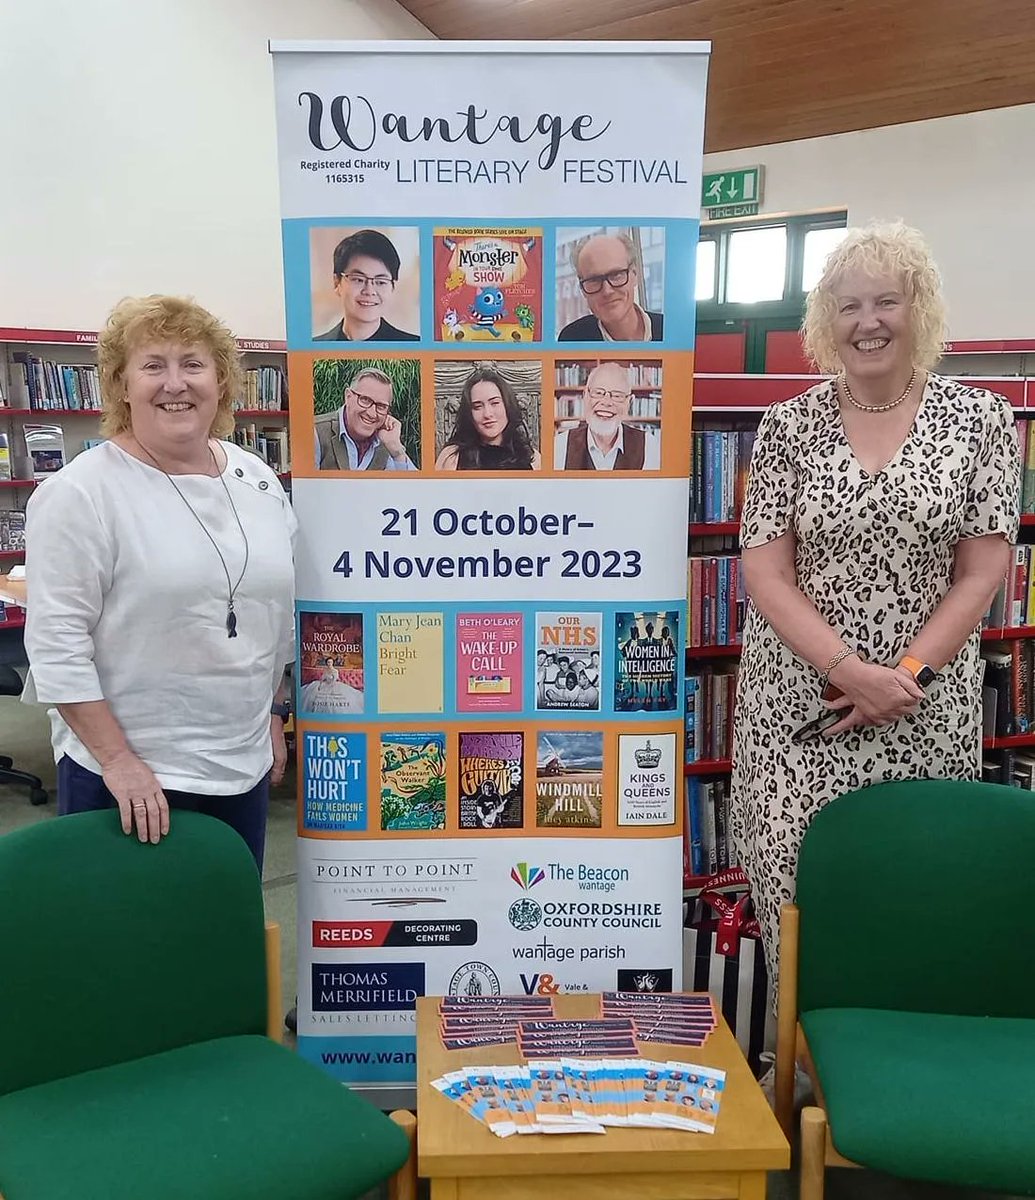 Don't forget that today you can come see us in the Wantage Library to buy your tickets for this year's Festival. One of our fabulous volunteers, Ruth (left in the photo), will be there between 12-2pm today to help. Alternatively you can book here: buff.ly/2OsnHmV